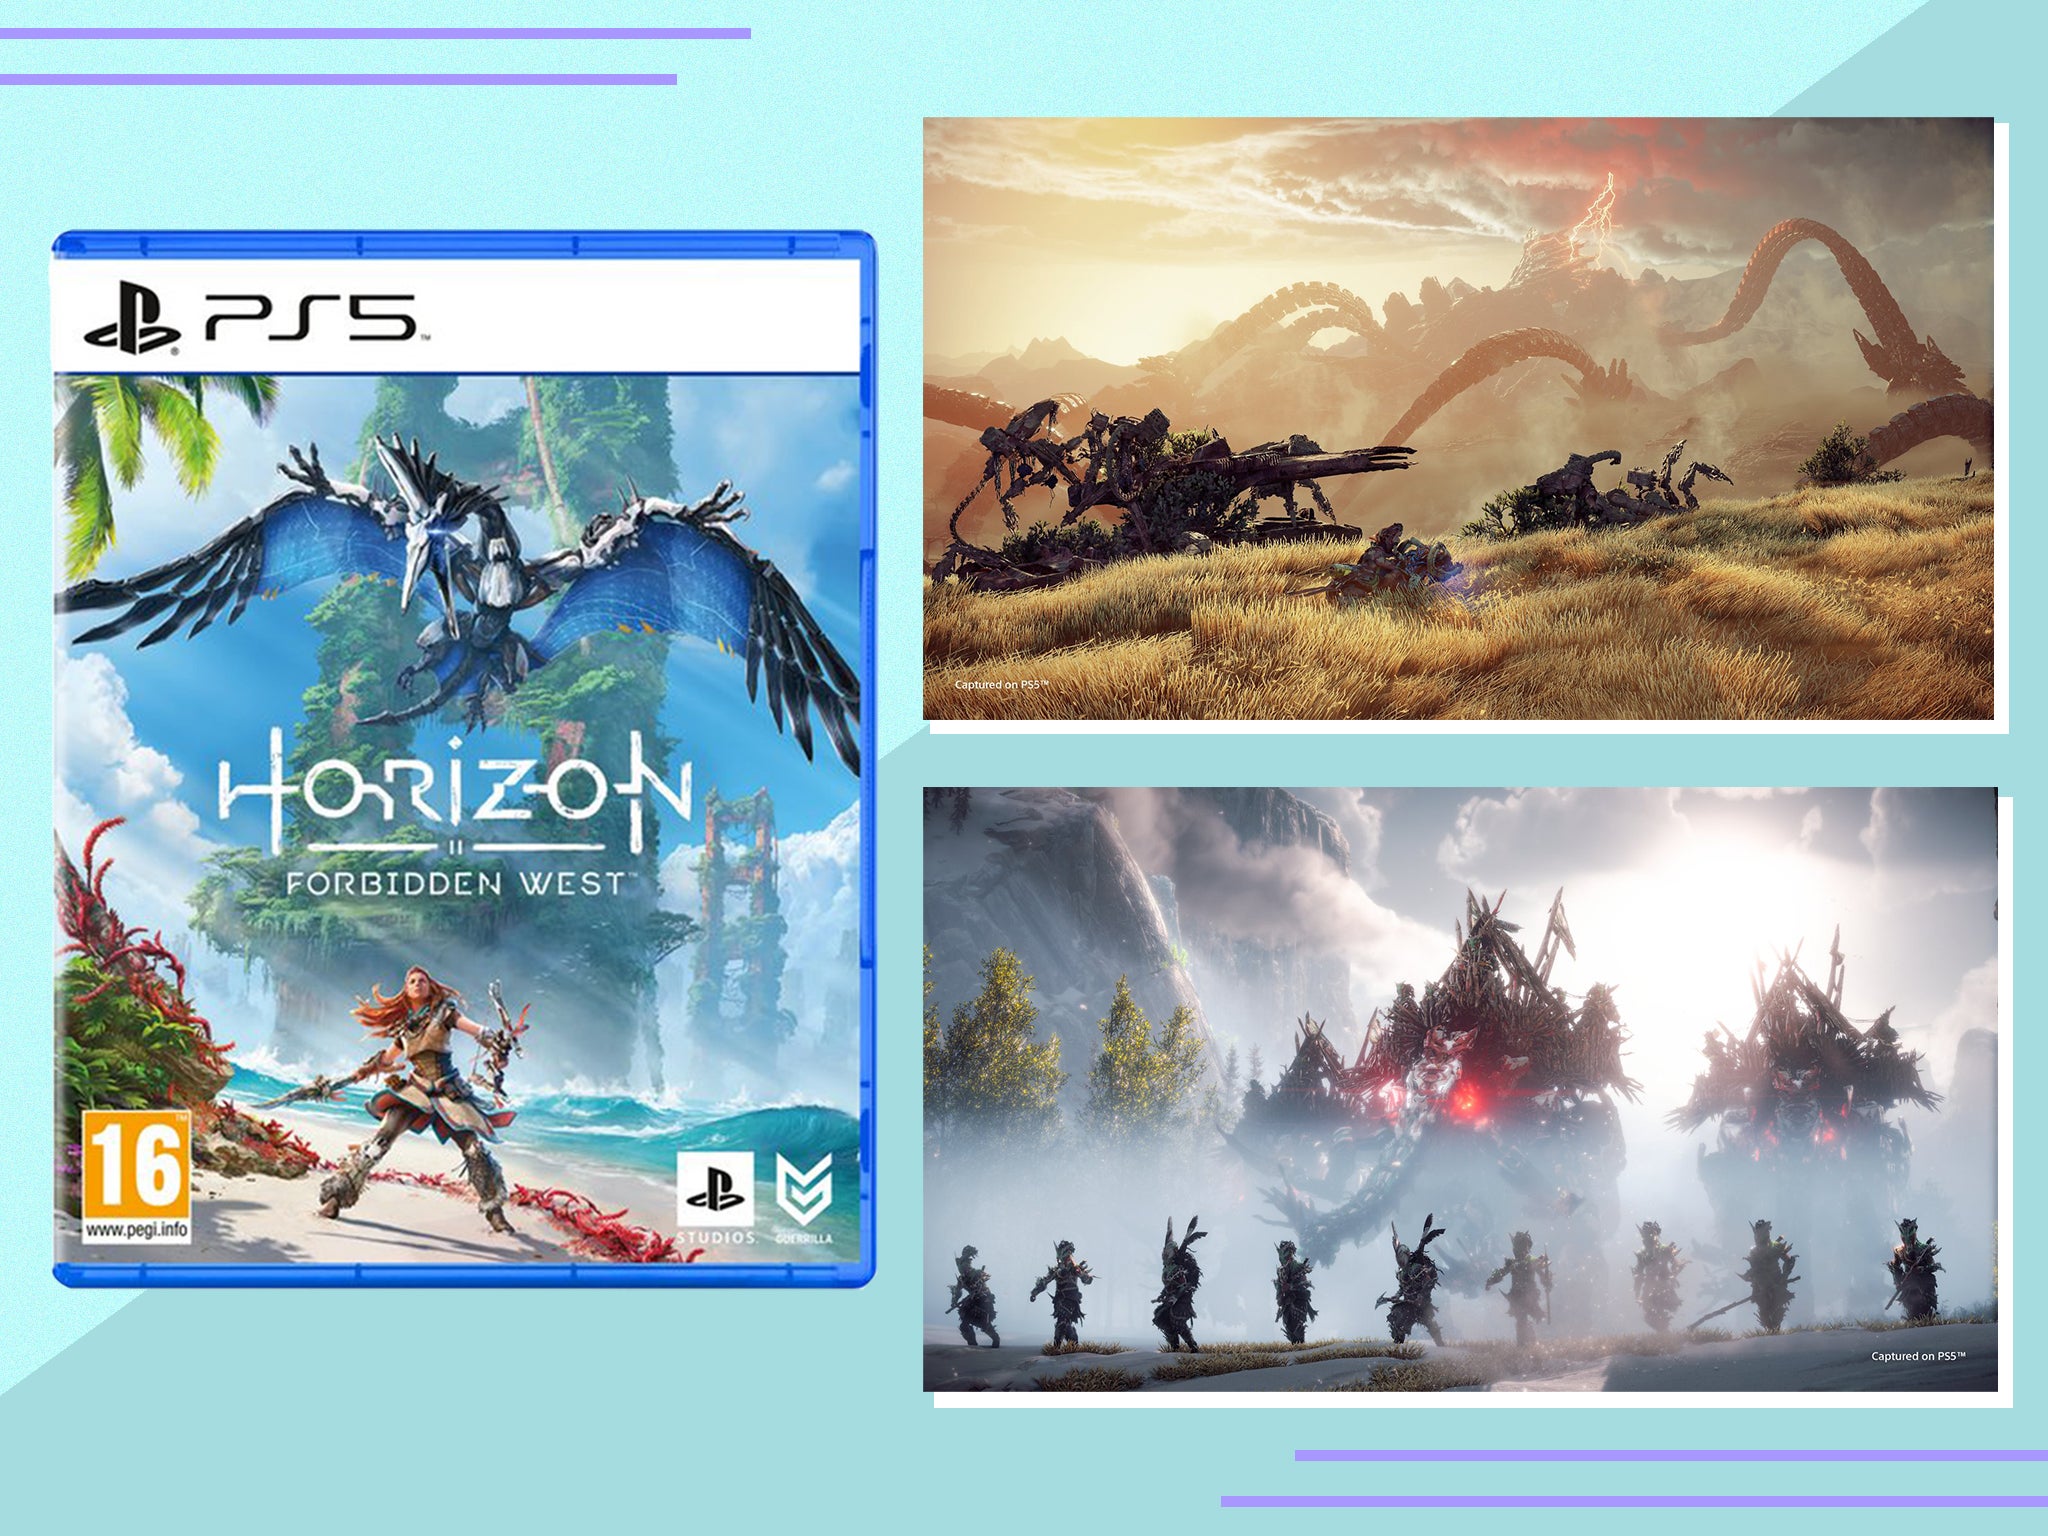 Horizon Forbidden West review: Here's what we thought of its gameplay,  story and more